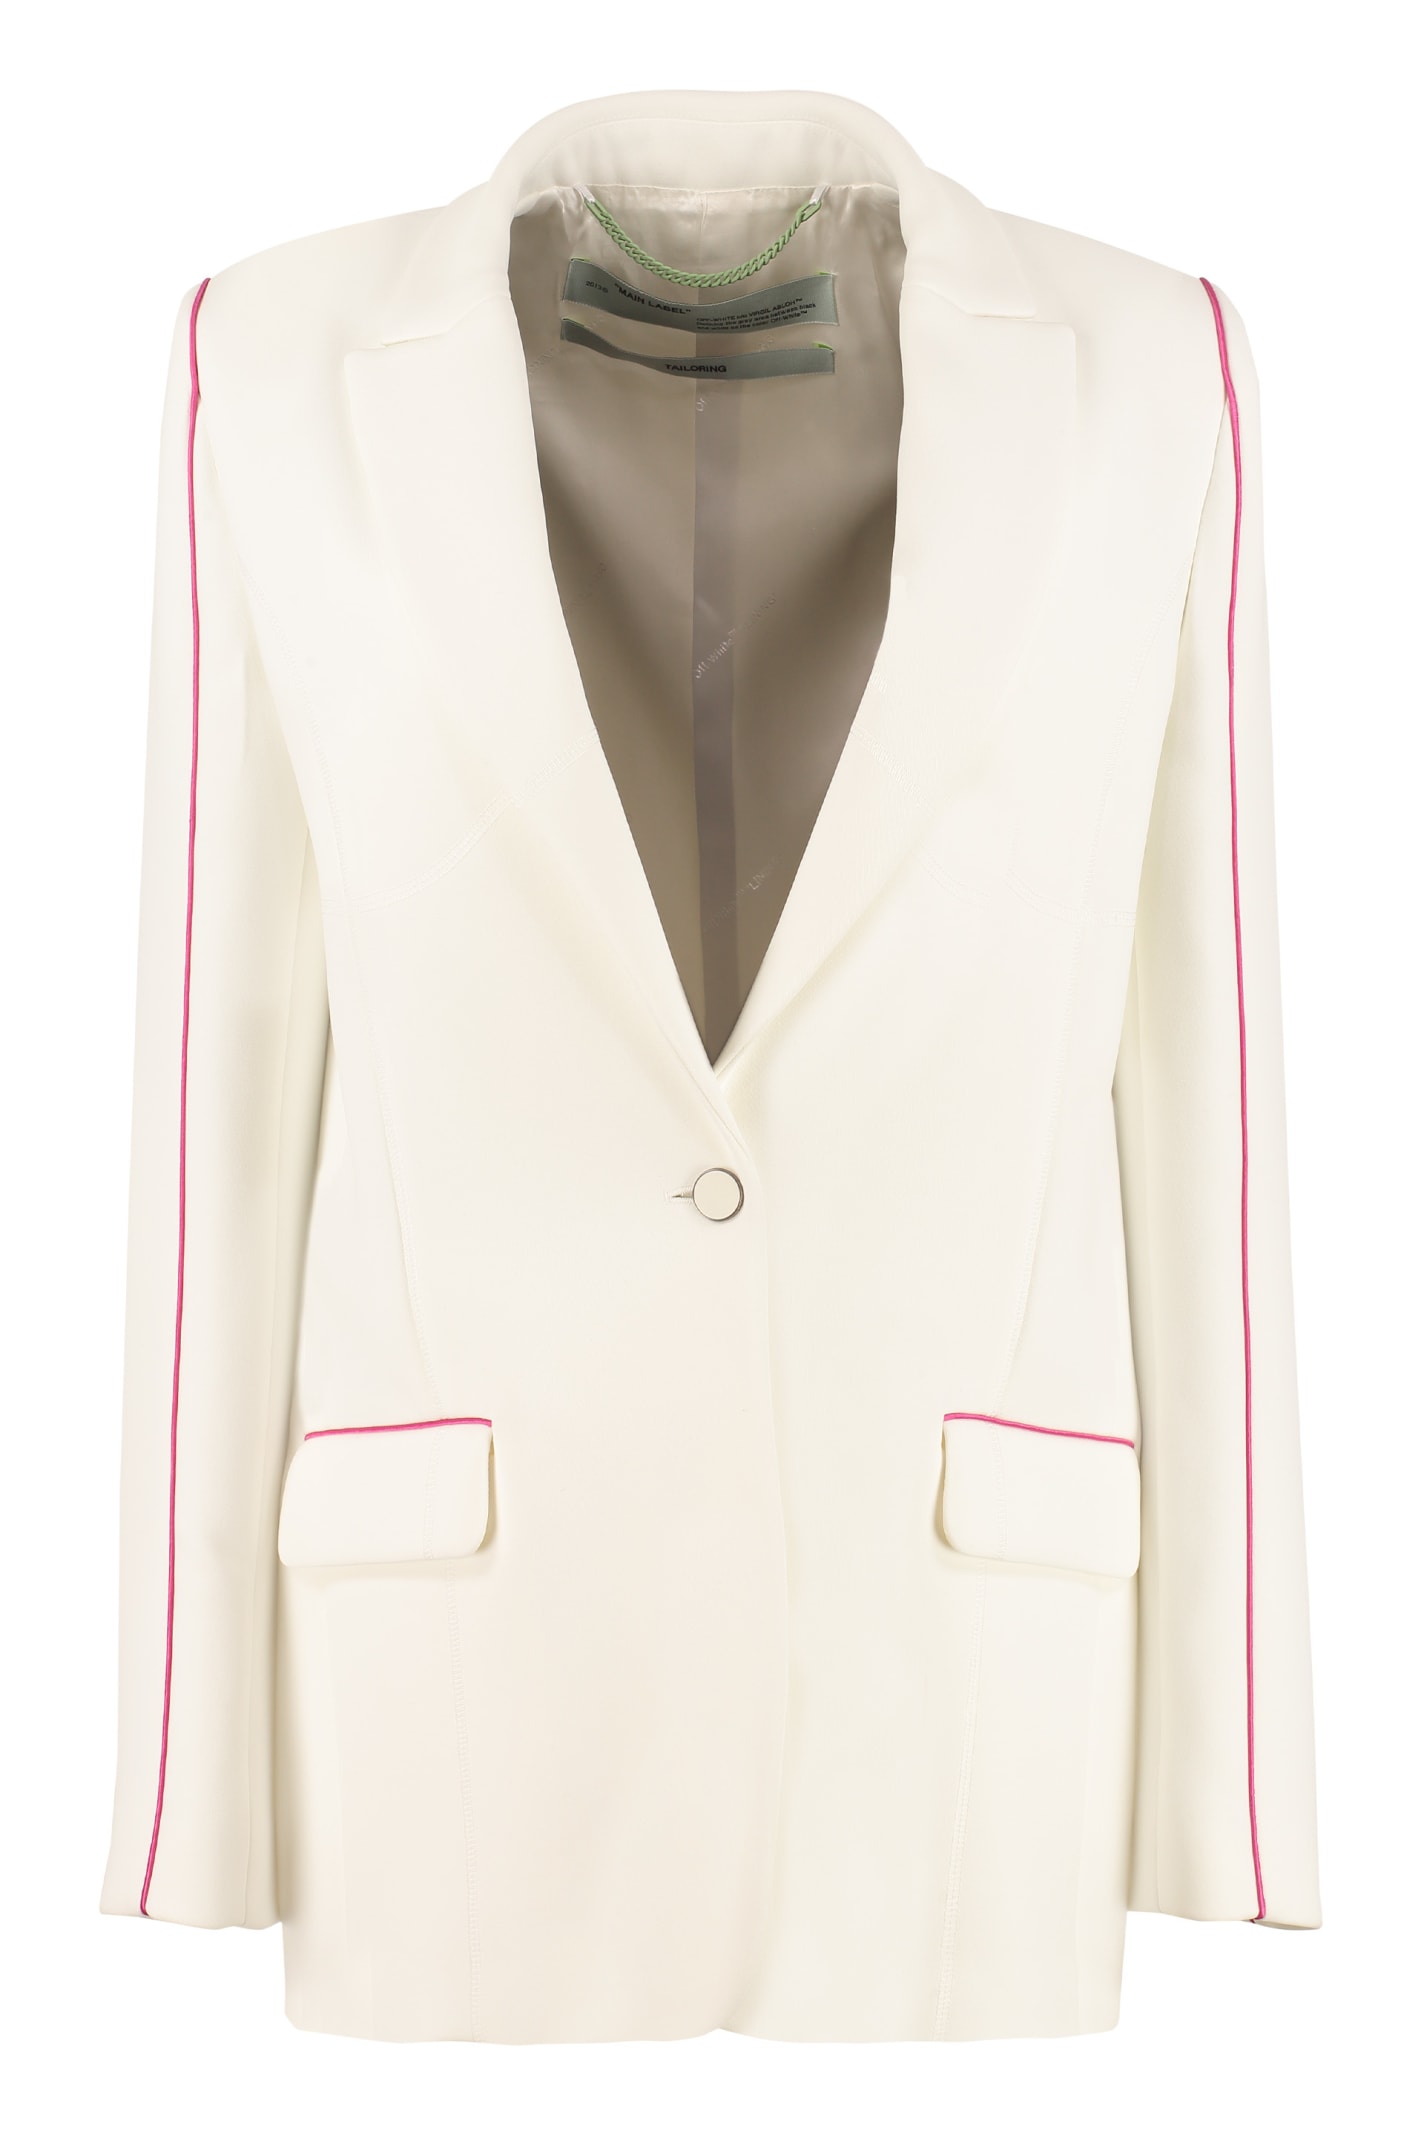 Off-White Contrasting Piping Blazer